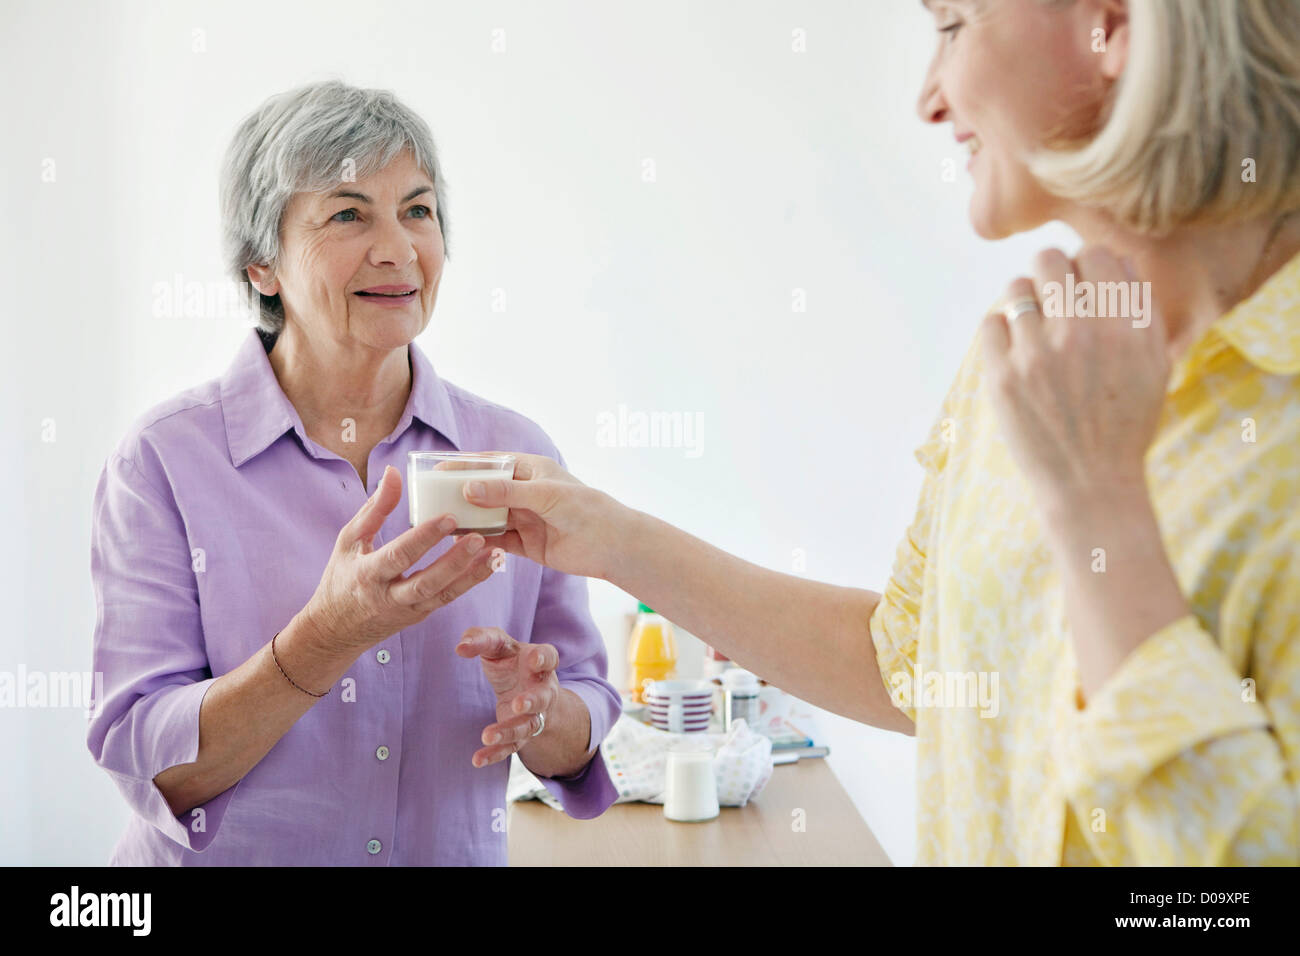 ELDERLY PERSON, DAIRY PRODUCT Stock Photo